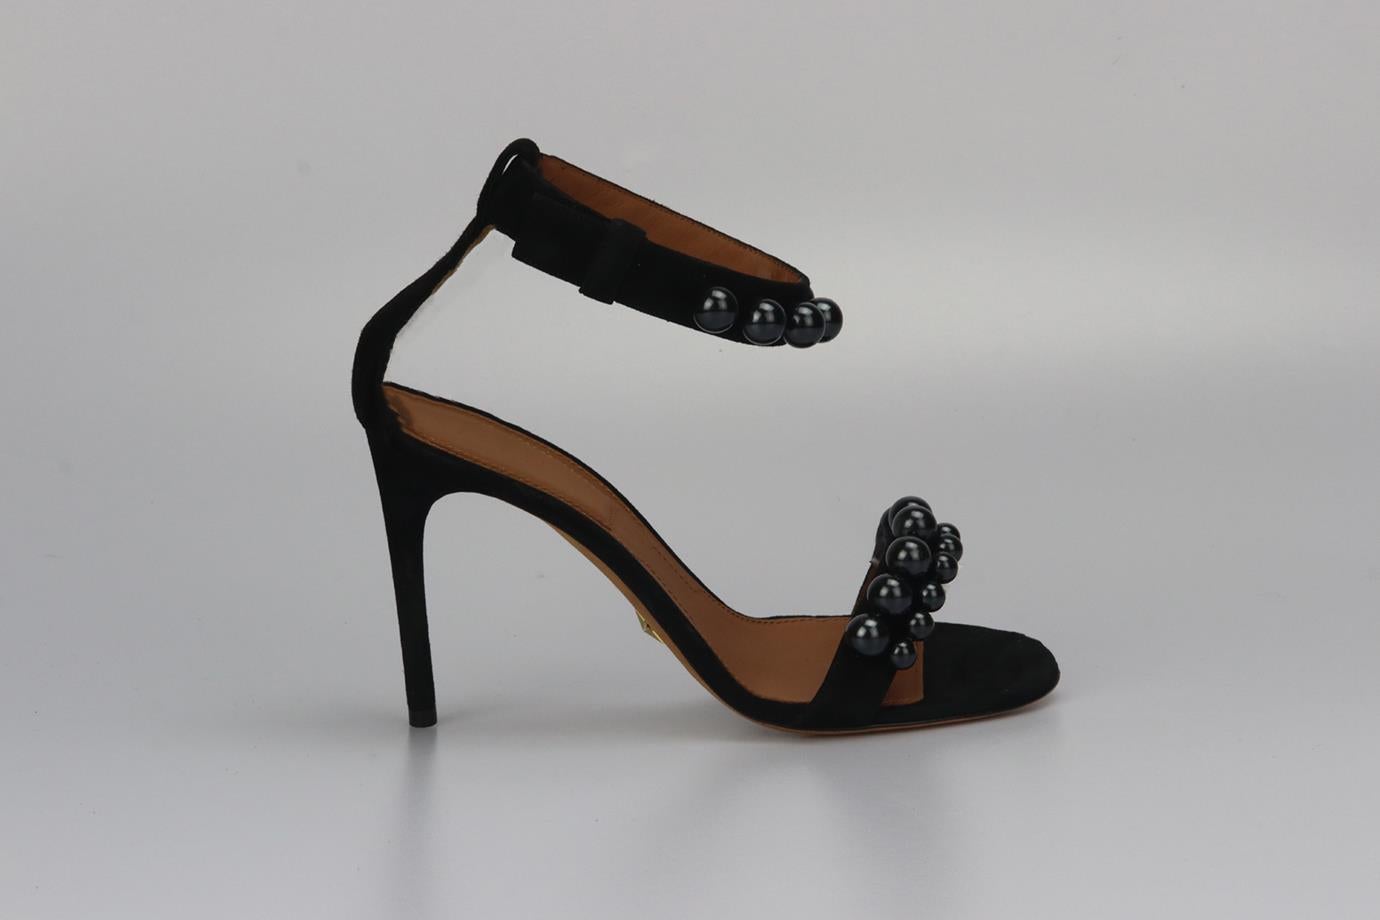 Givenchy Embellished Suede Sandals. Black. Buckle fastening - Side. Does not come with - dustbag or box. EU 38.5 (UK 5.5, US 8.5). Insole: 9.5 In. Heel Height: 3 In. Condition: New without box.
